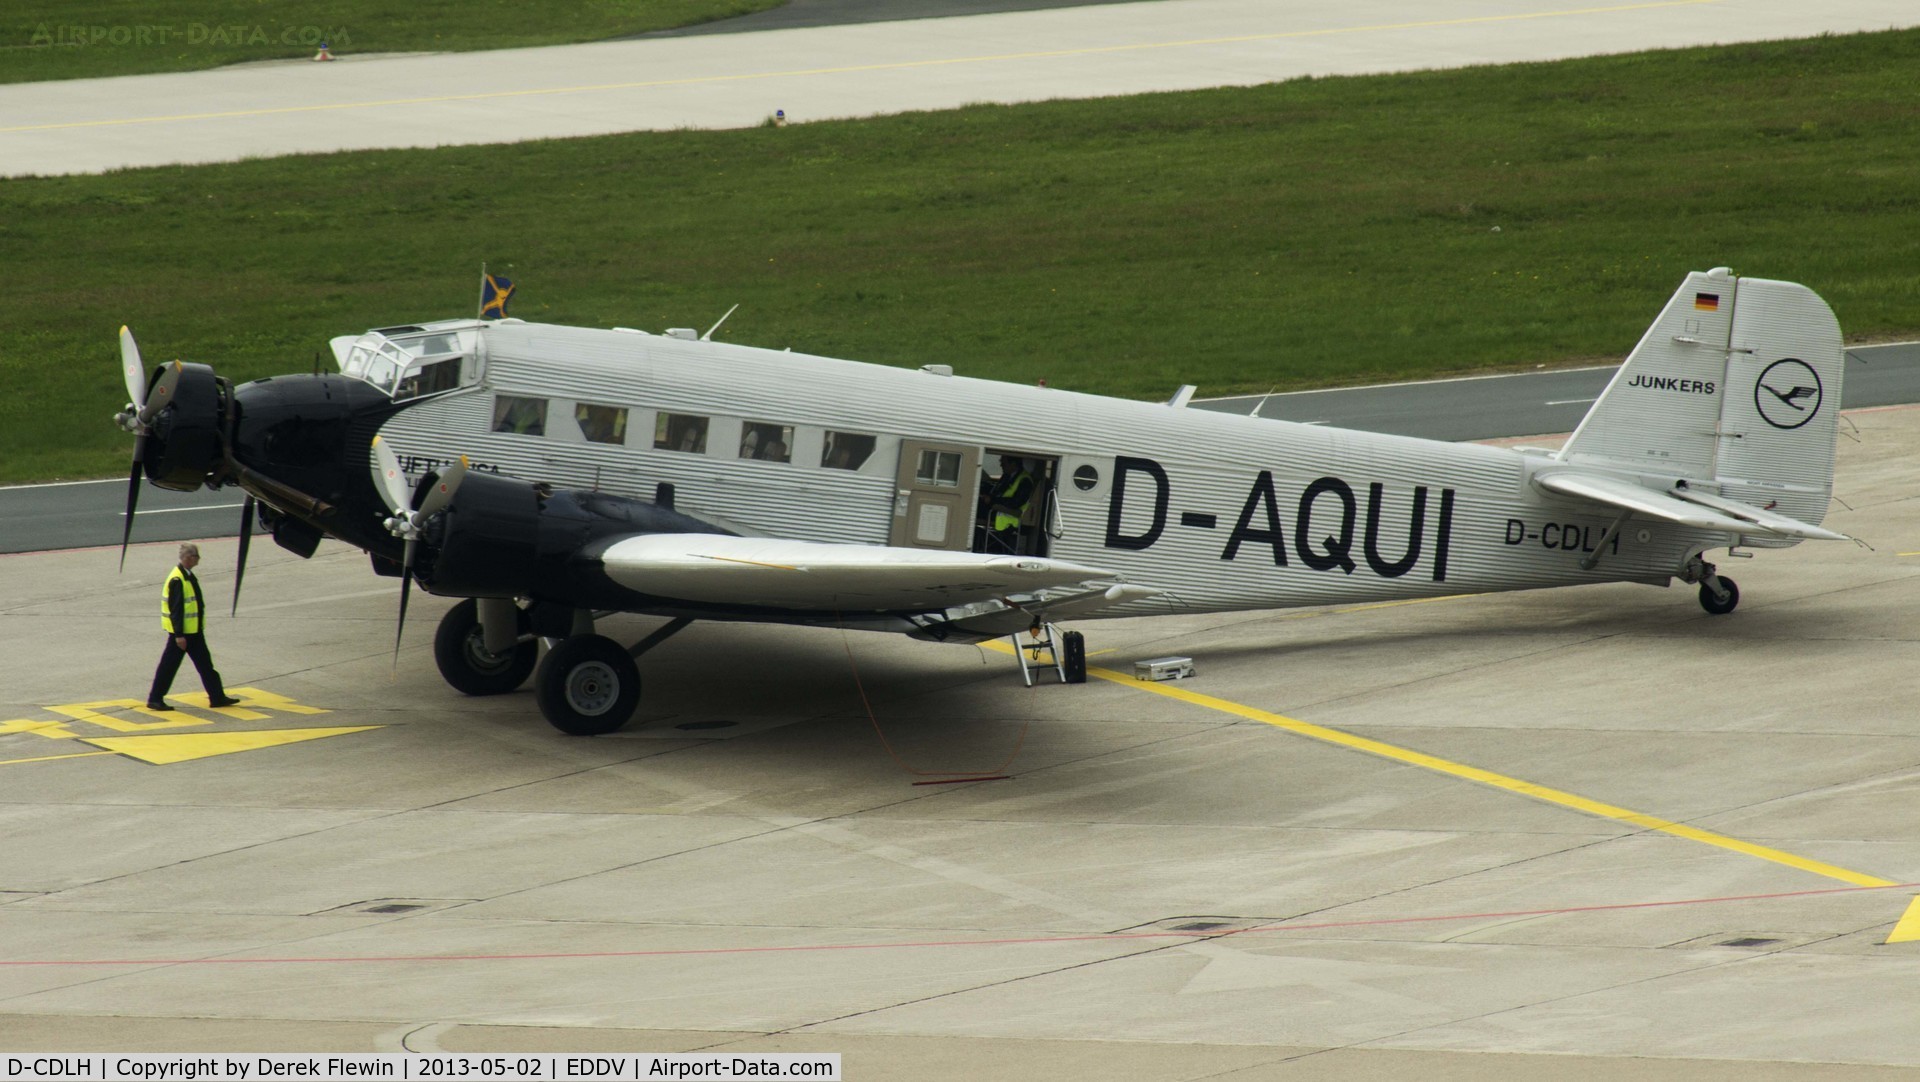 D-CDLH, 1936 Junkers Ju-52/3m C/N 130714, Oldest airworthy Ju, in historic Deutsche Luft Hansa colors as D-AQUI (the livery this plane wore in 1936), P&W-engines, now with 3-blades propellers, til 1984 known as Iron Annie N52JU